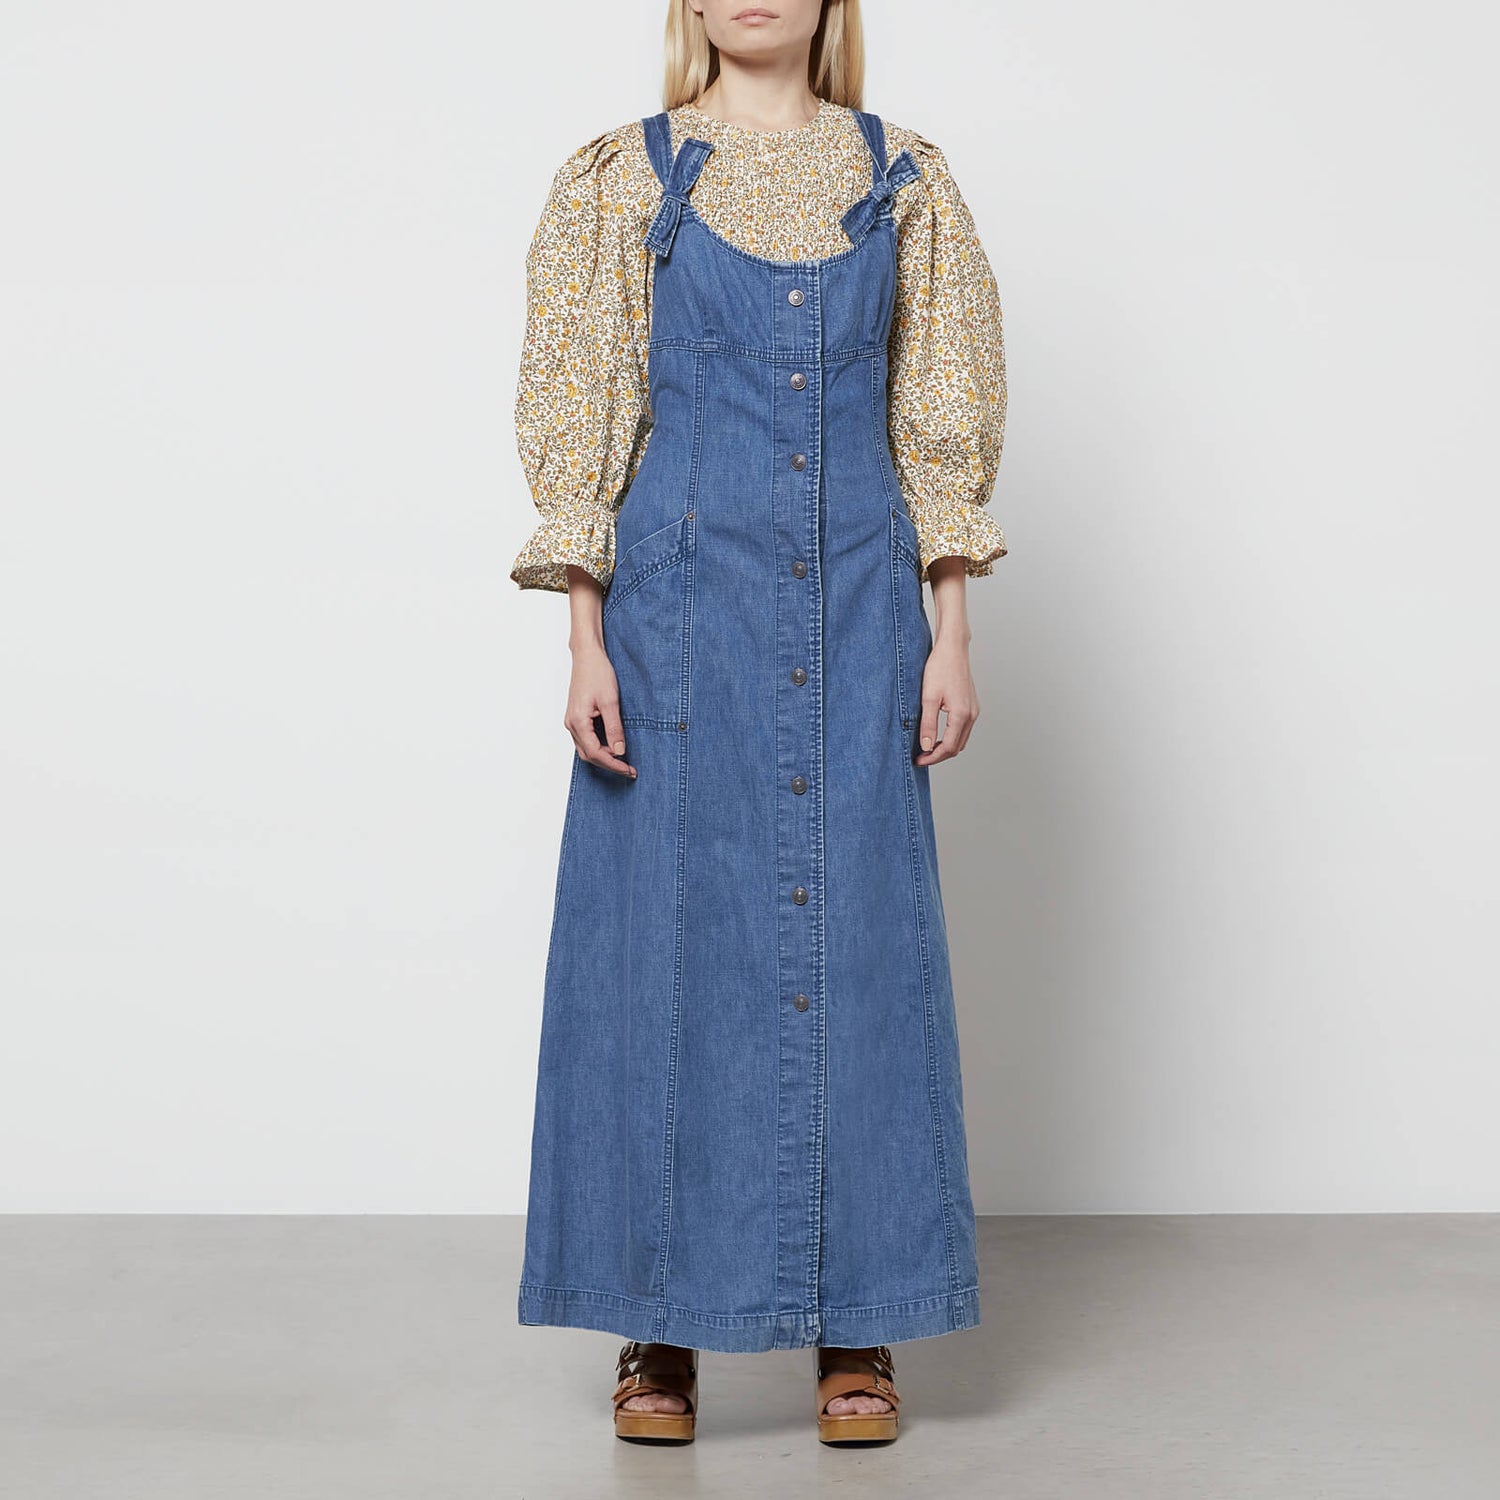 Free People Women's Time After Time Denim Dress - Journey